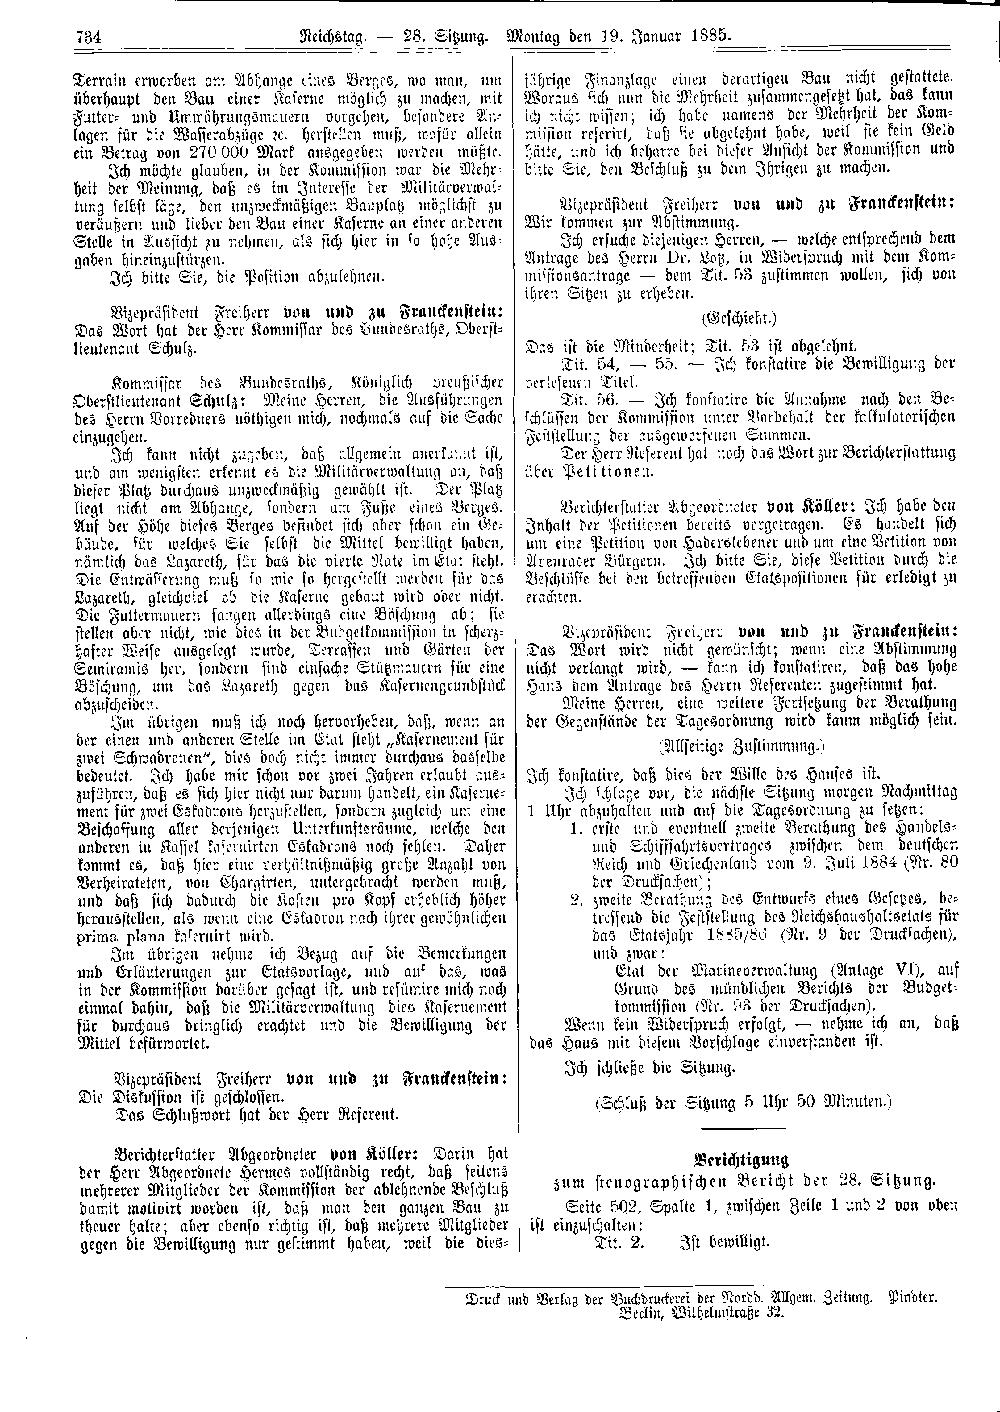 Scan of page 734